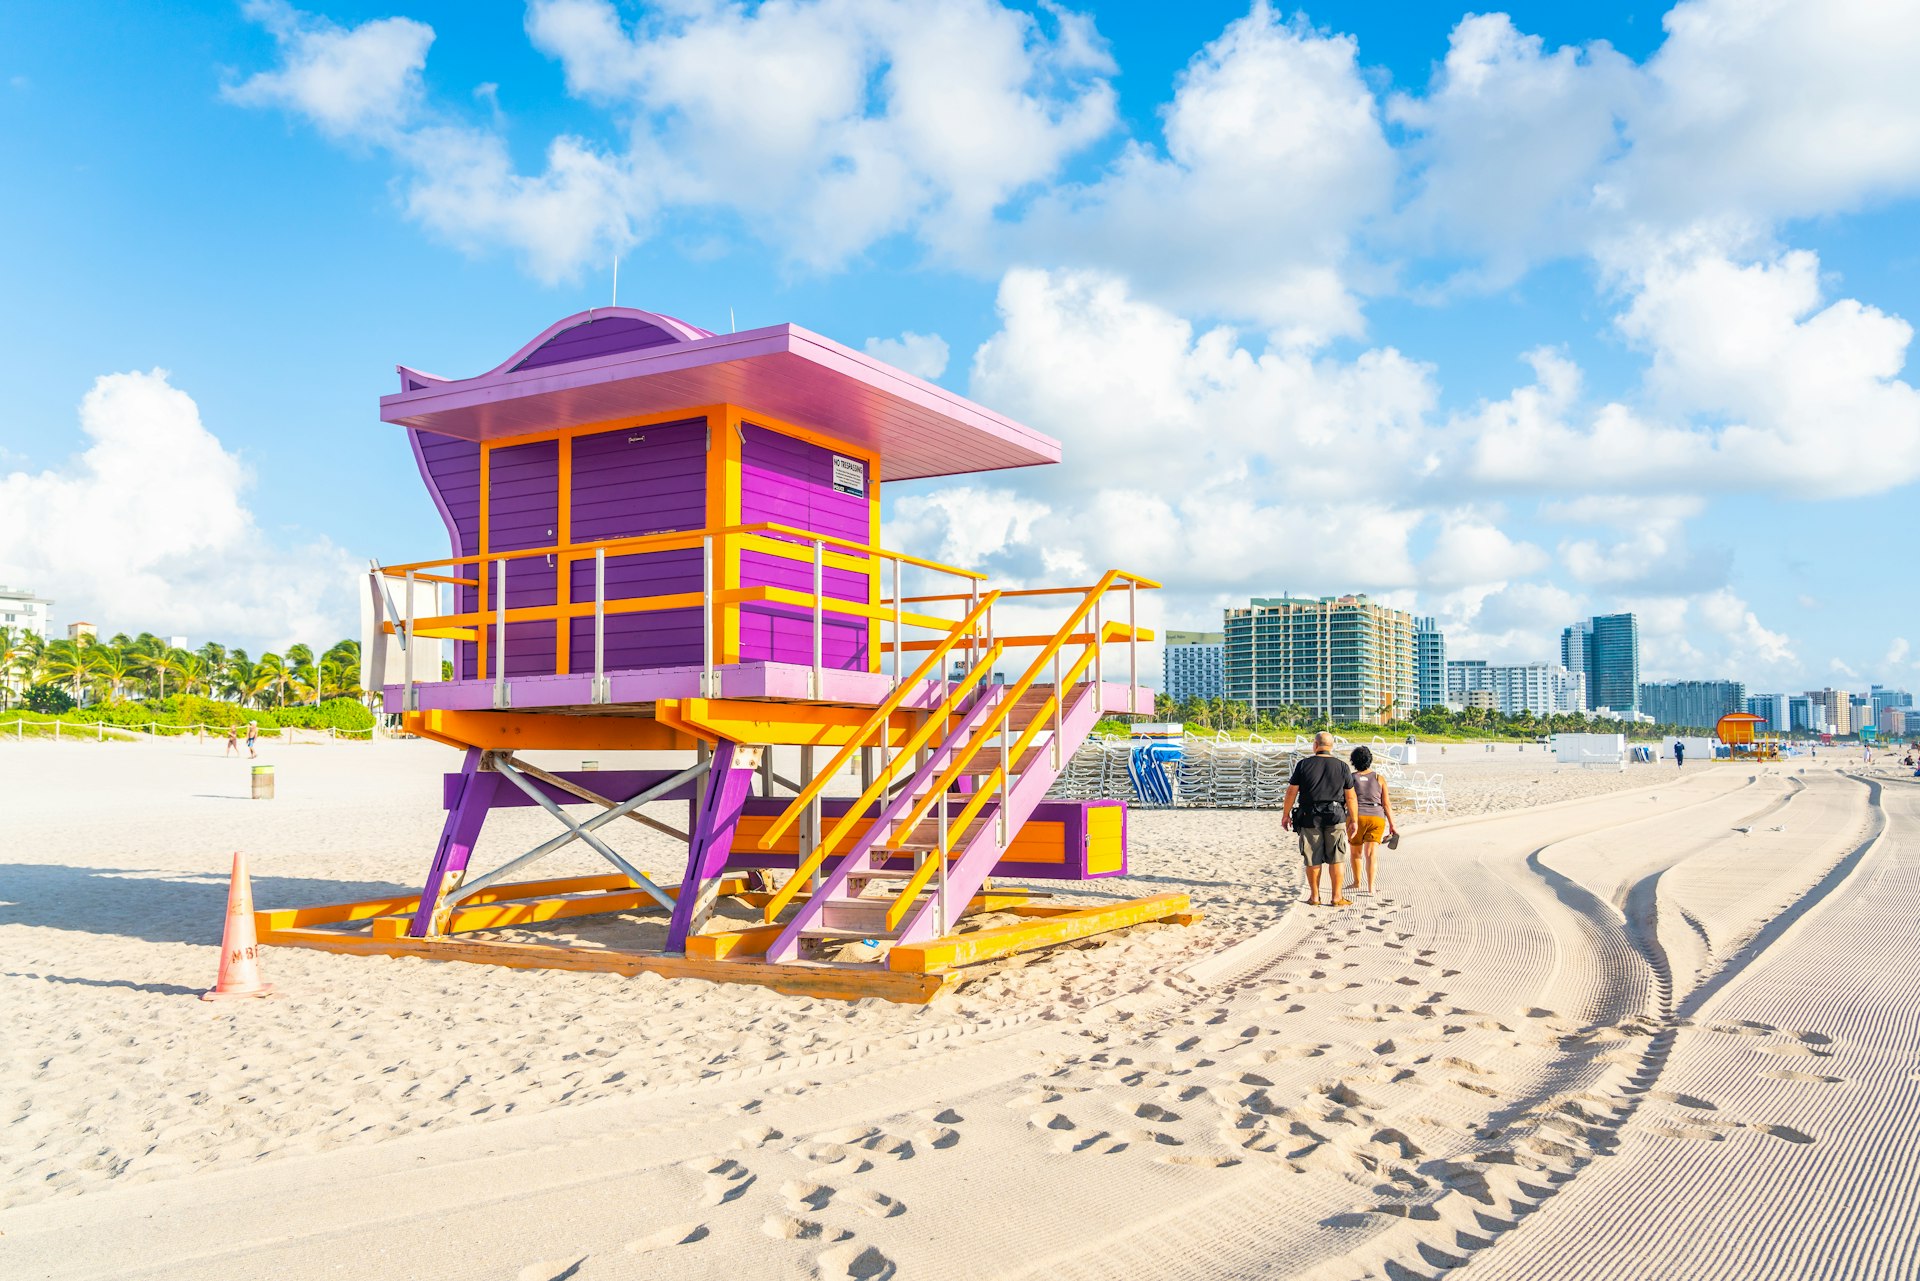 Two people walk by a pink and yellow art deco-style lifeguard hut on a sandy beach